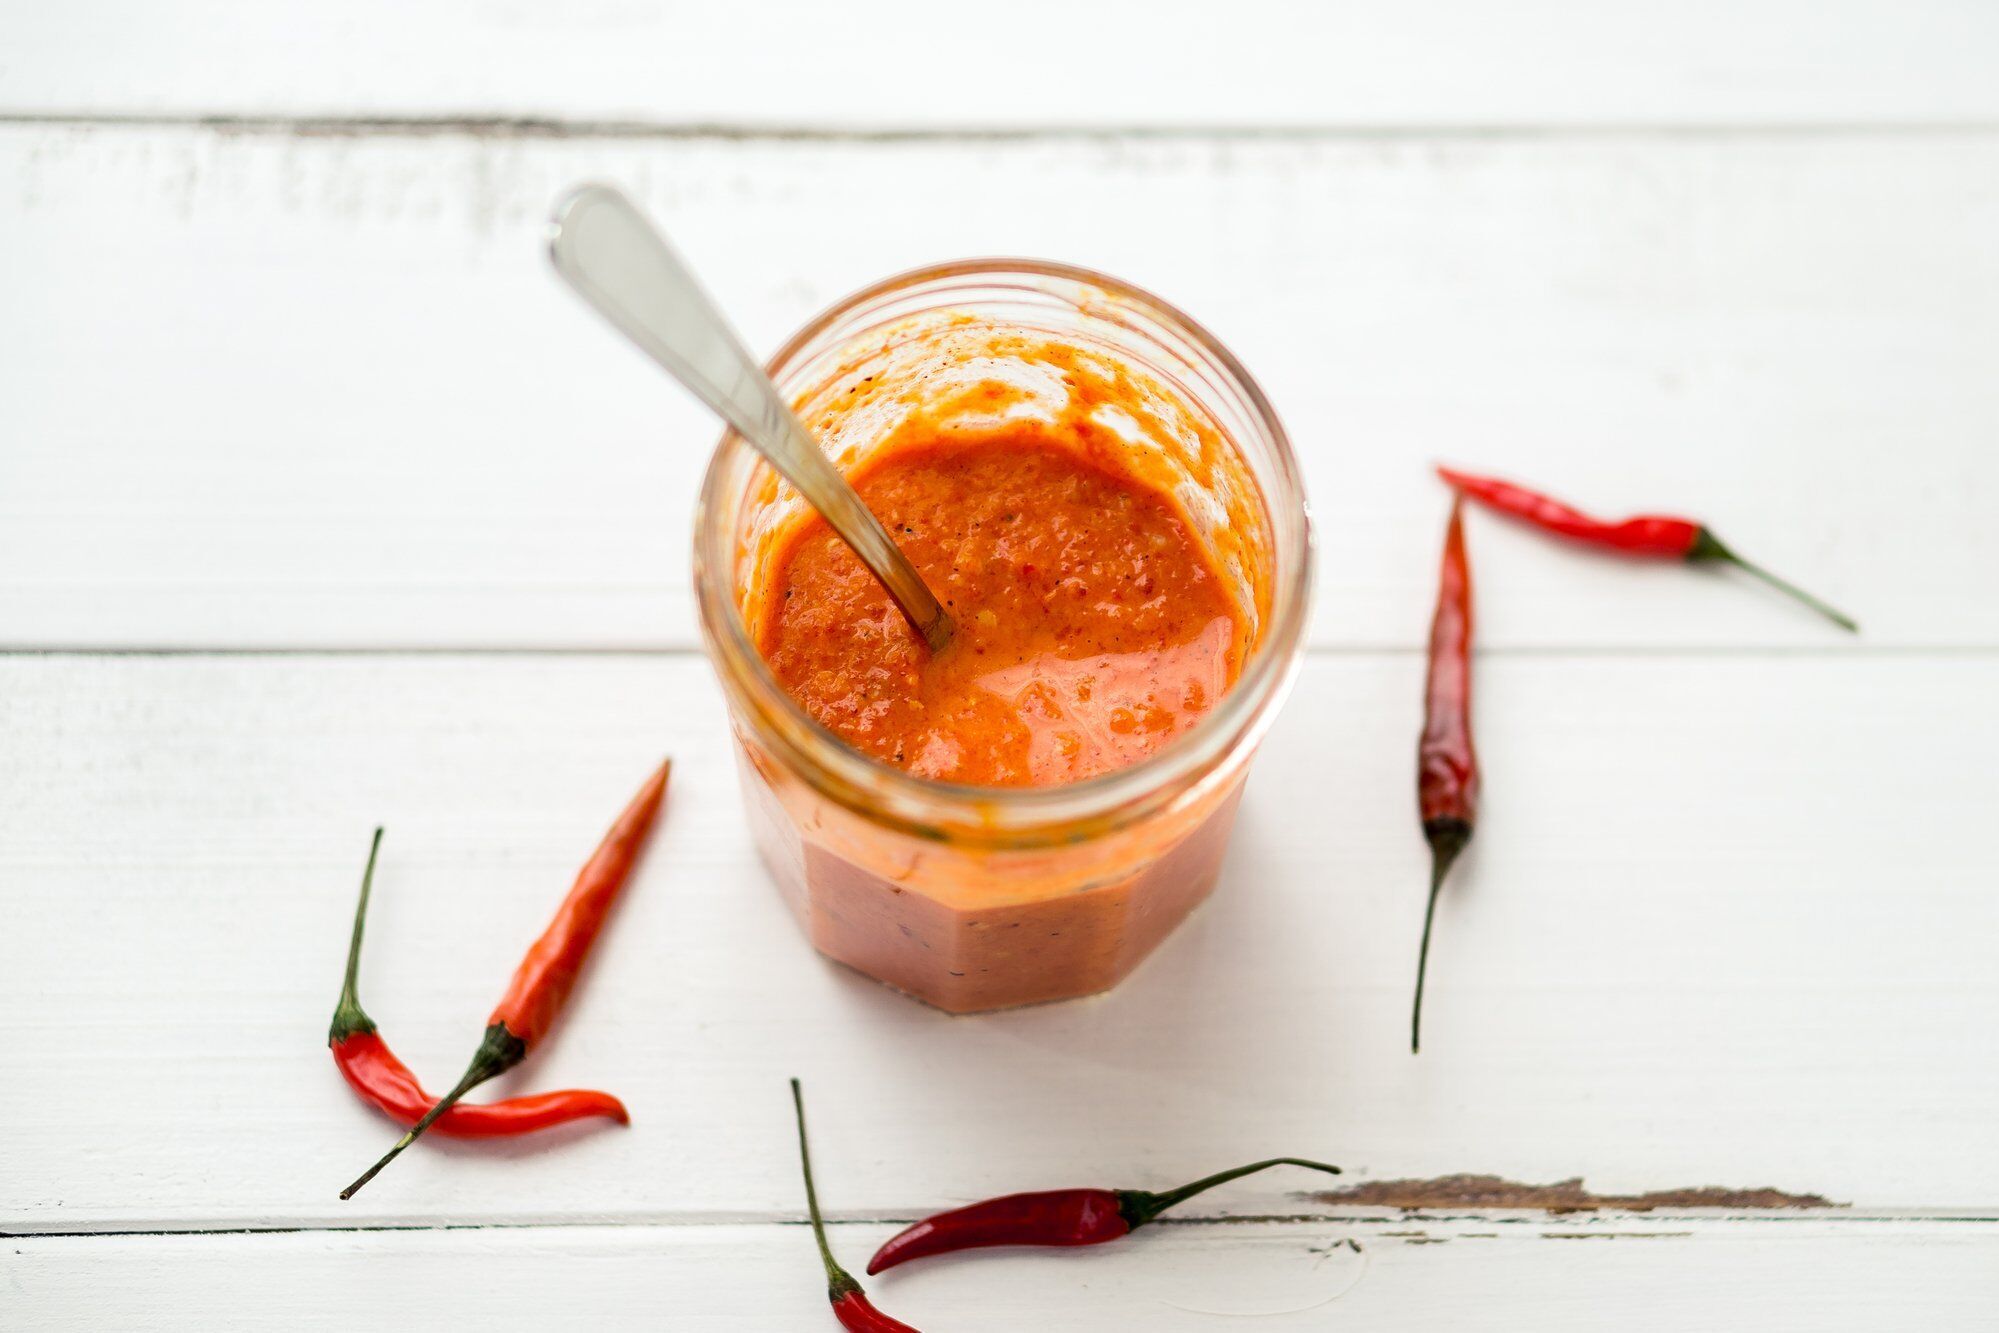 Bell pepper and red pepper sauce